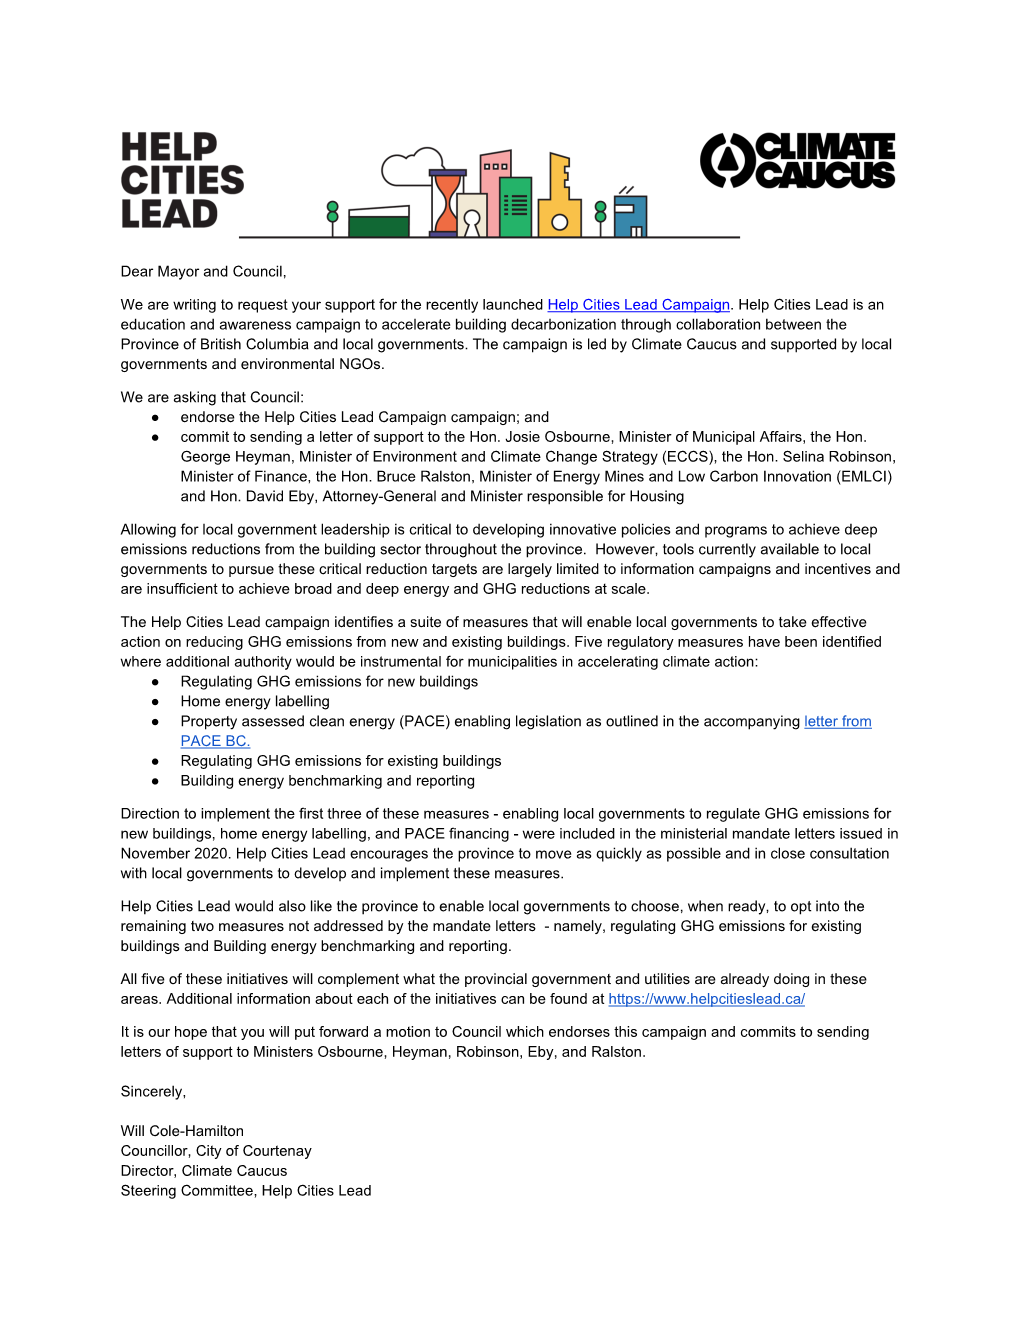 Dear Mayor and Council, We Are Writing to Request Your Support for the Recently Launched Help Cities Lead Campaign. Help Cities